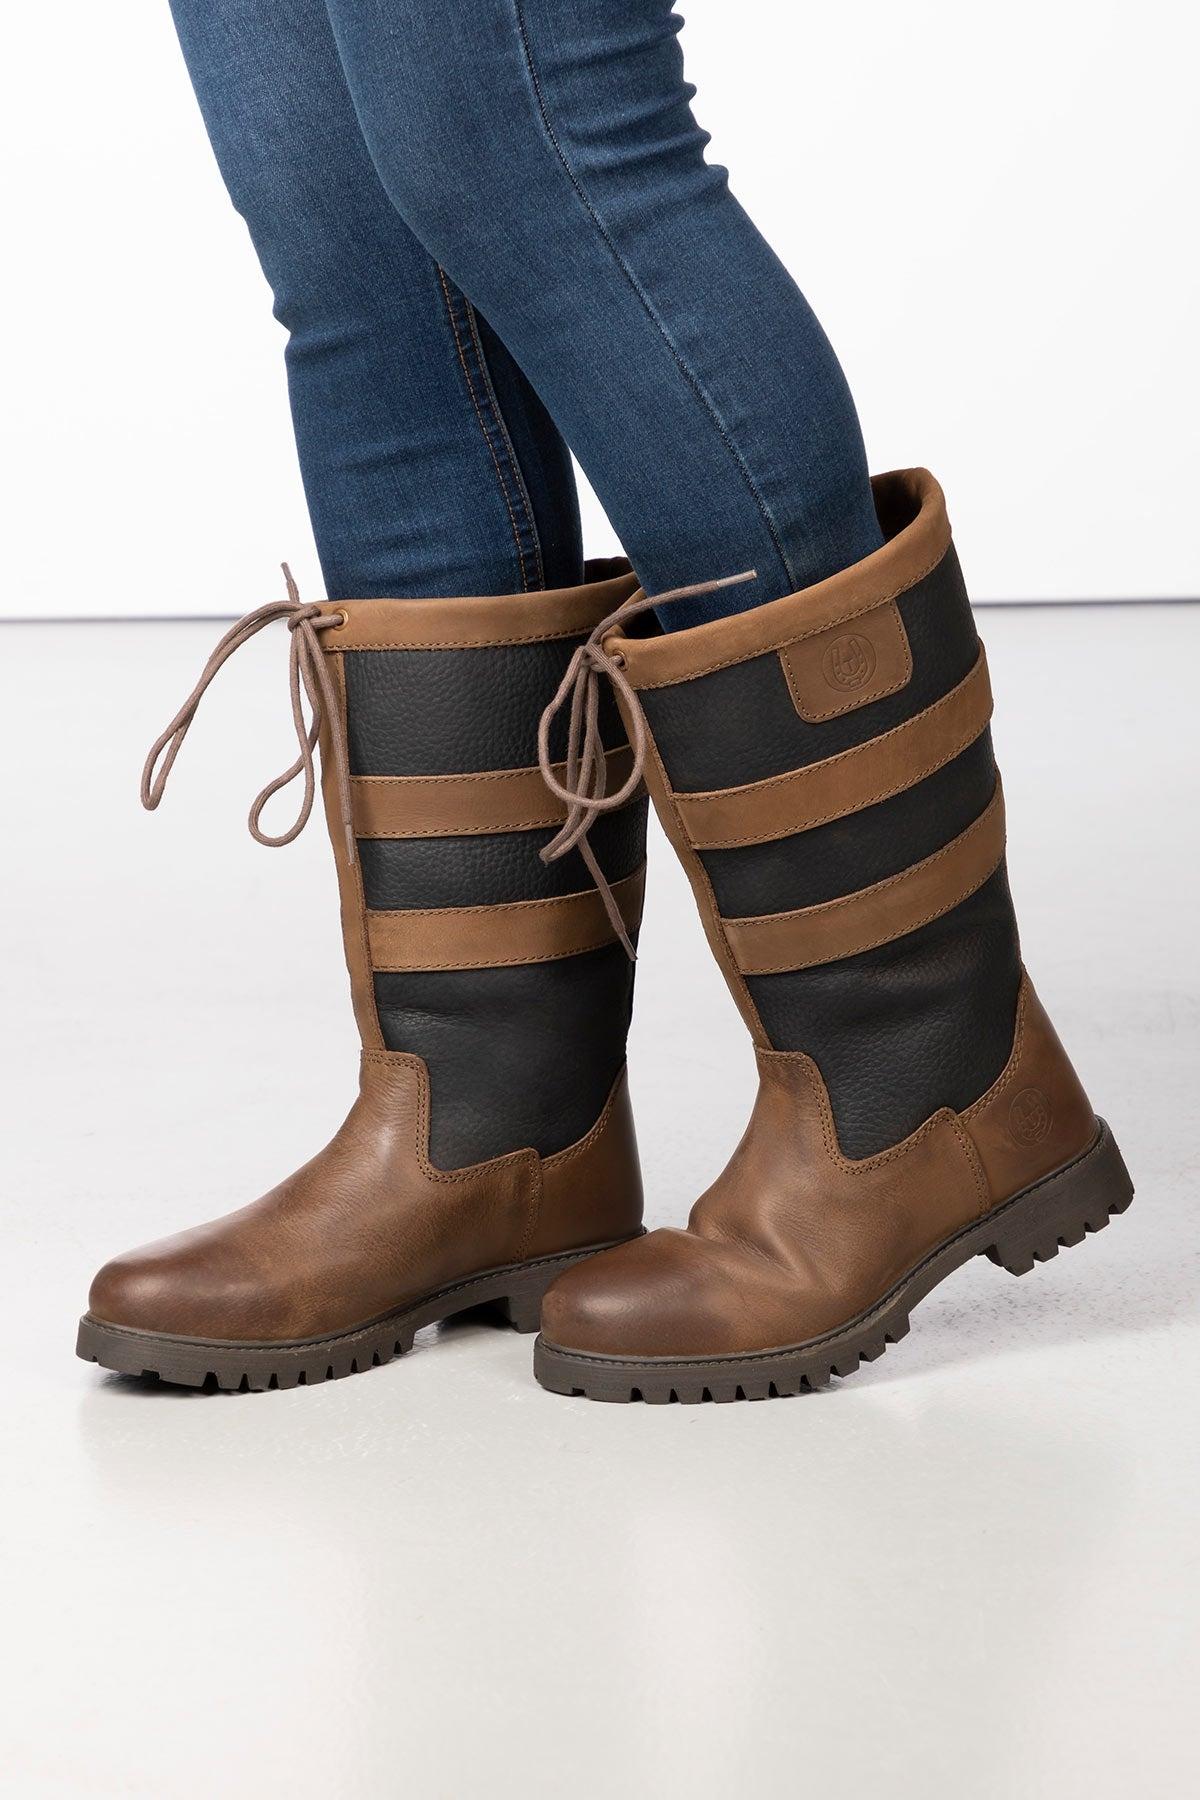 Ladies Mid-Calf Country Boots DE | Tullymore Boots | Rydale